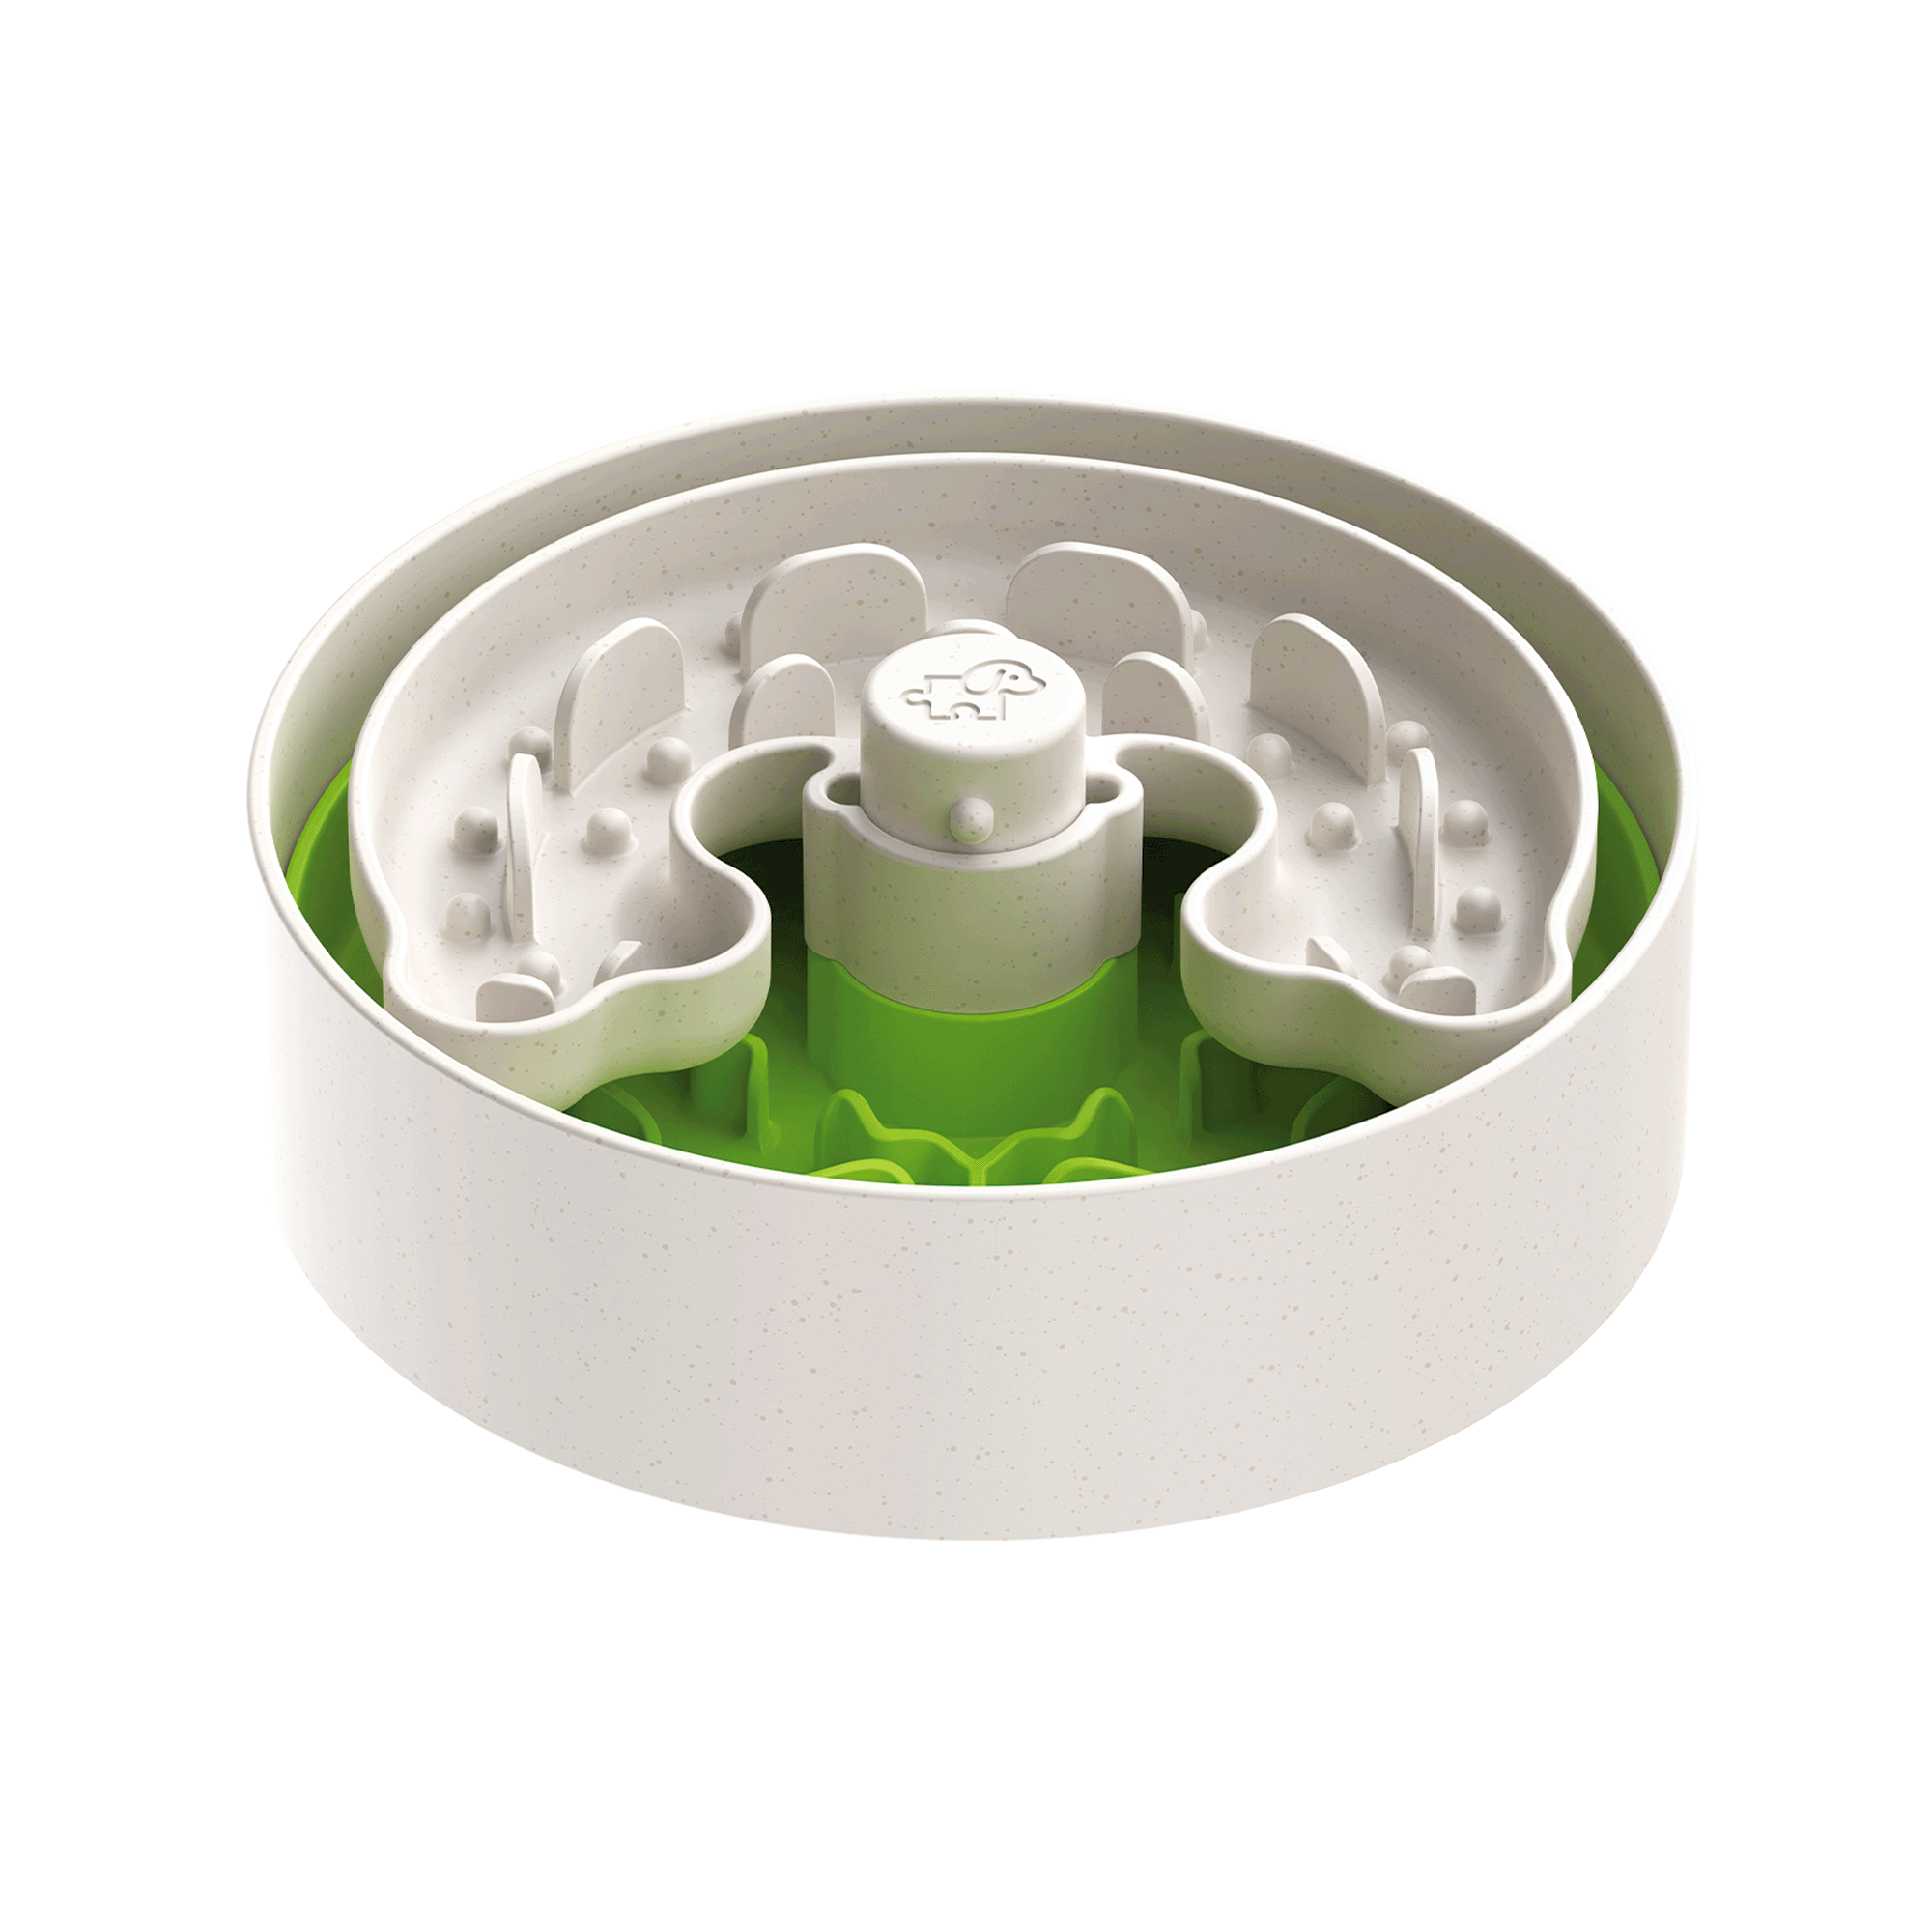 The Puzzle Feeder Puzzle Feeder™ / Dog Bowl for Eating Habit Training -  Lawn Green - 153 requests